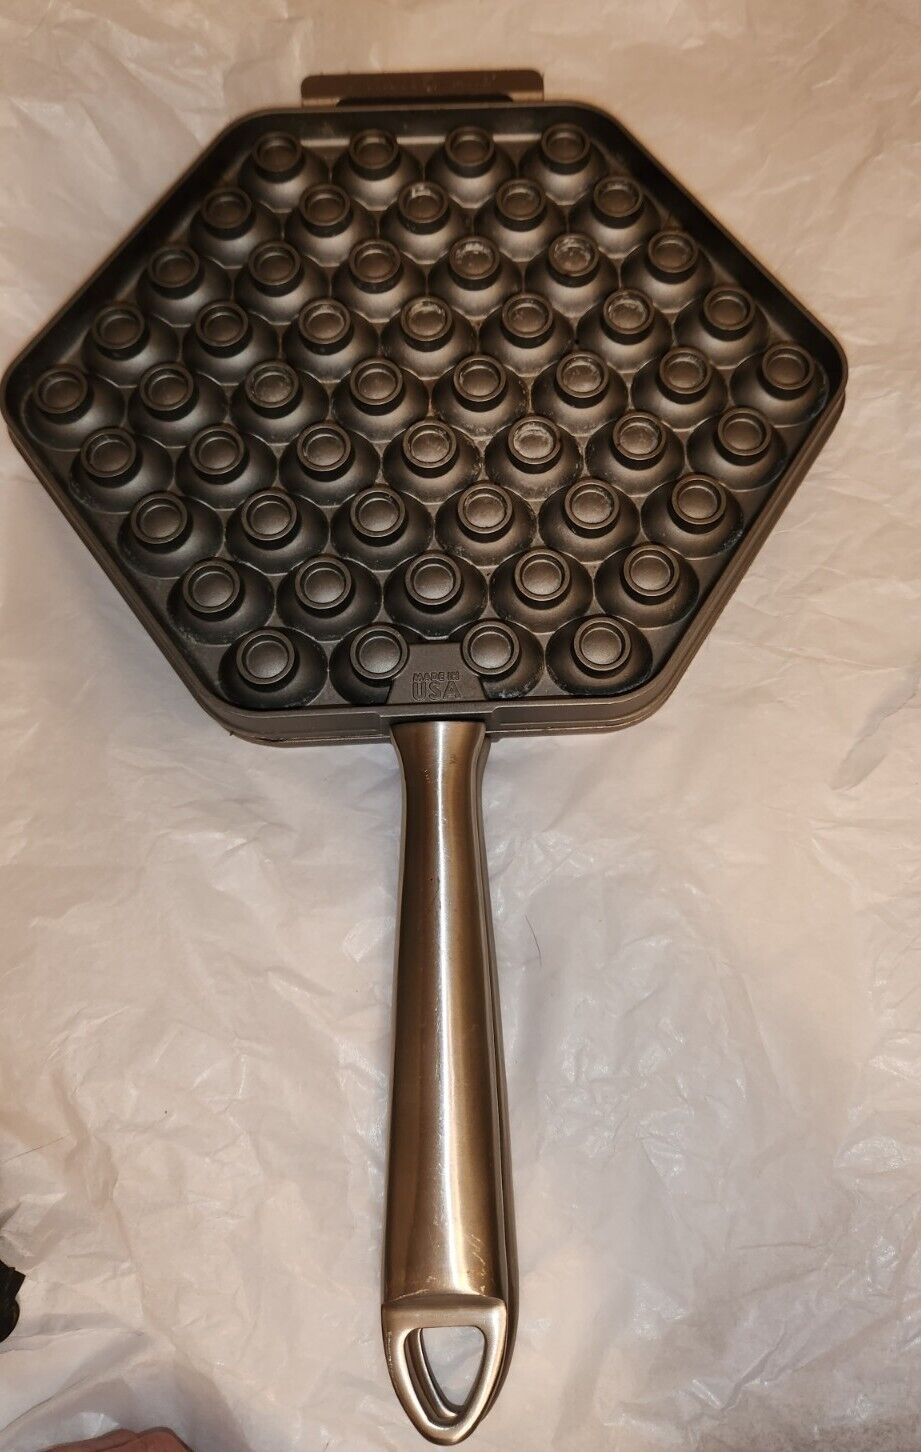 Nordic Ware Egg Waffle Iron Bubble 2 Piece Pan Made In USA Hanging Handle EUC